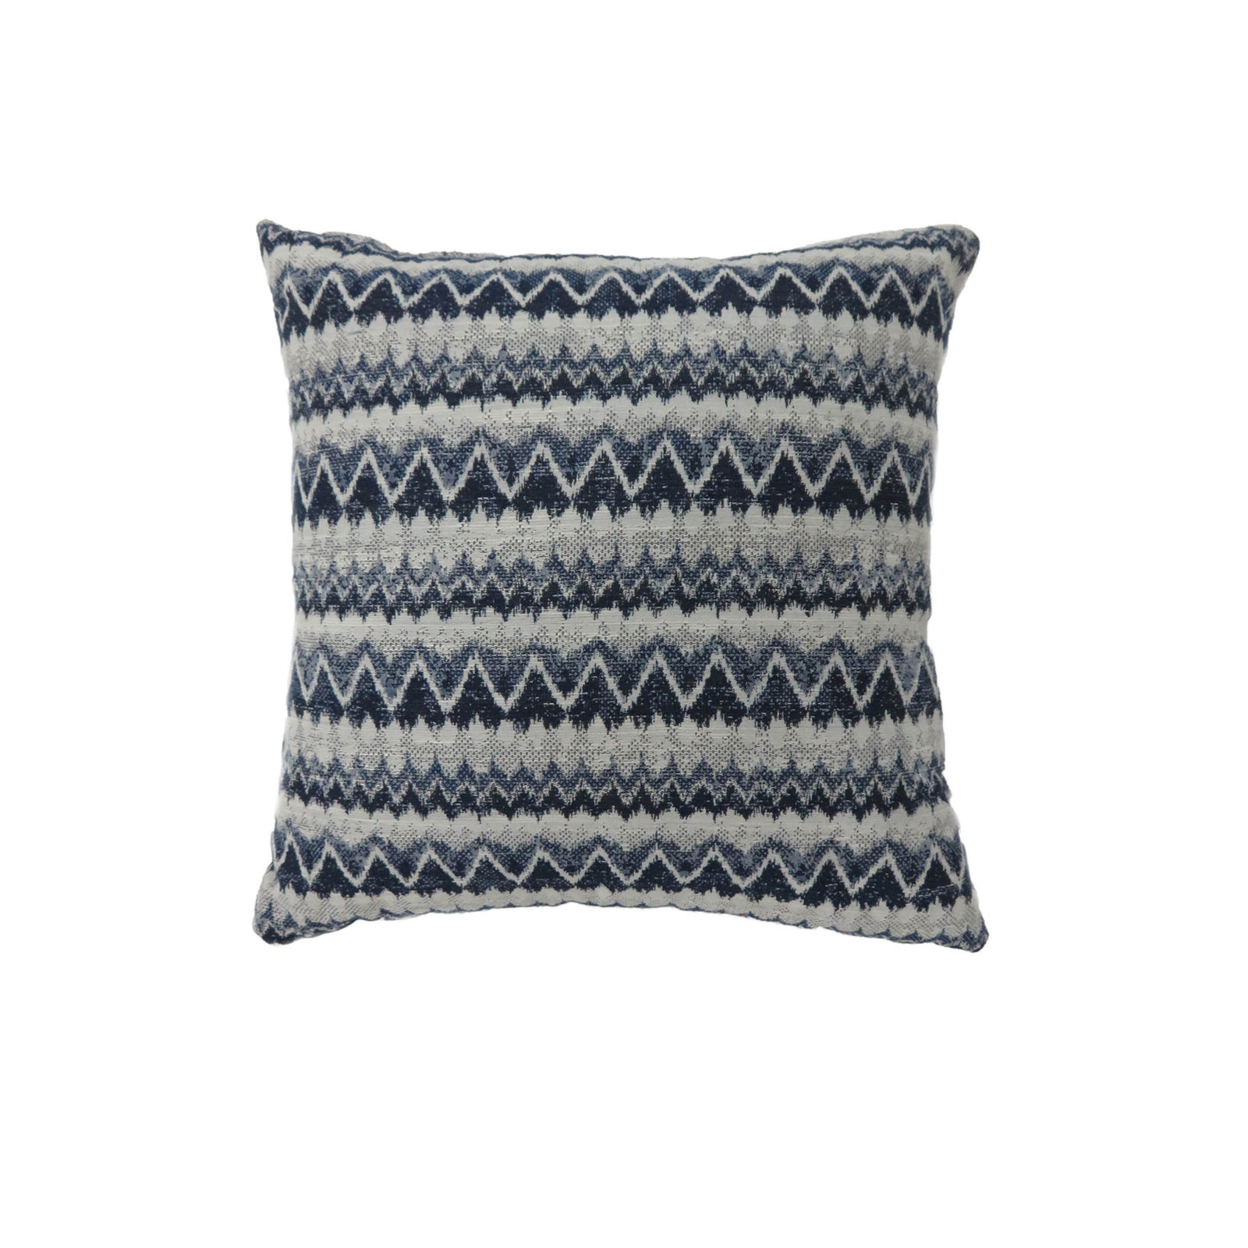 22 Inch Throw Pillow, Set Of 2, Zig Zag Pattern Polyester Fabric, Navy, White